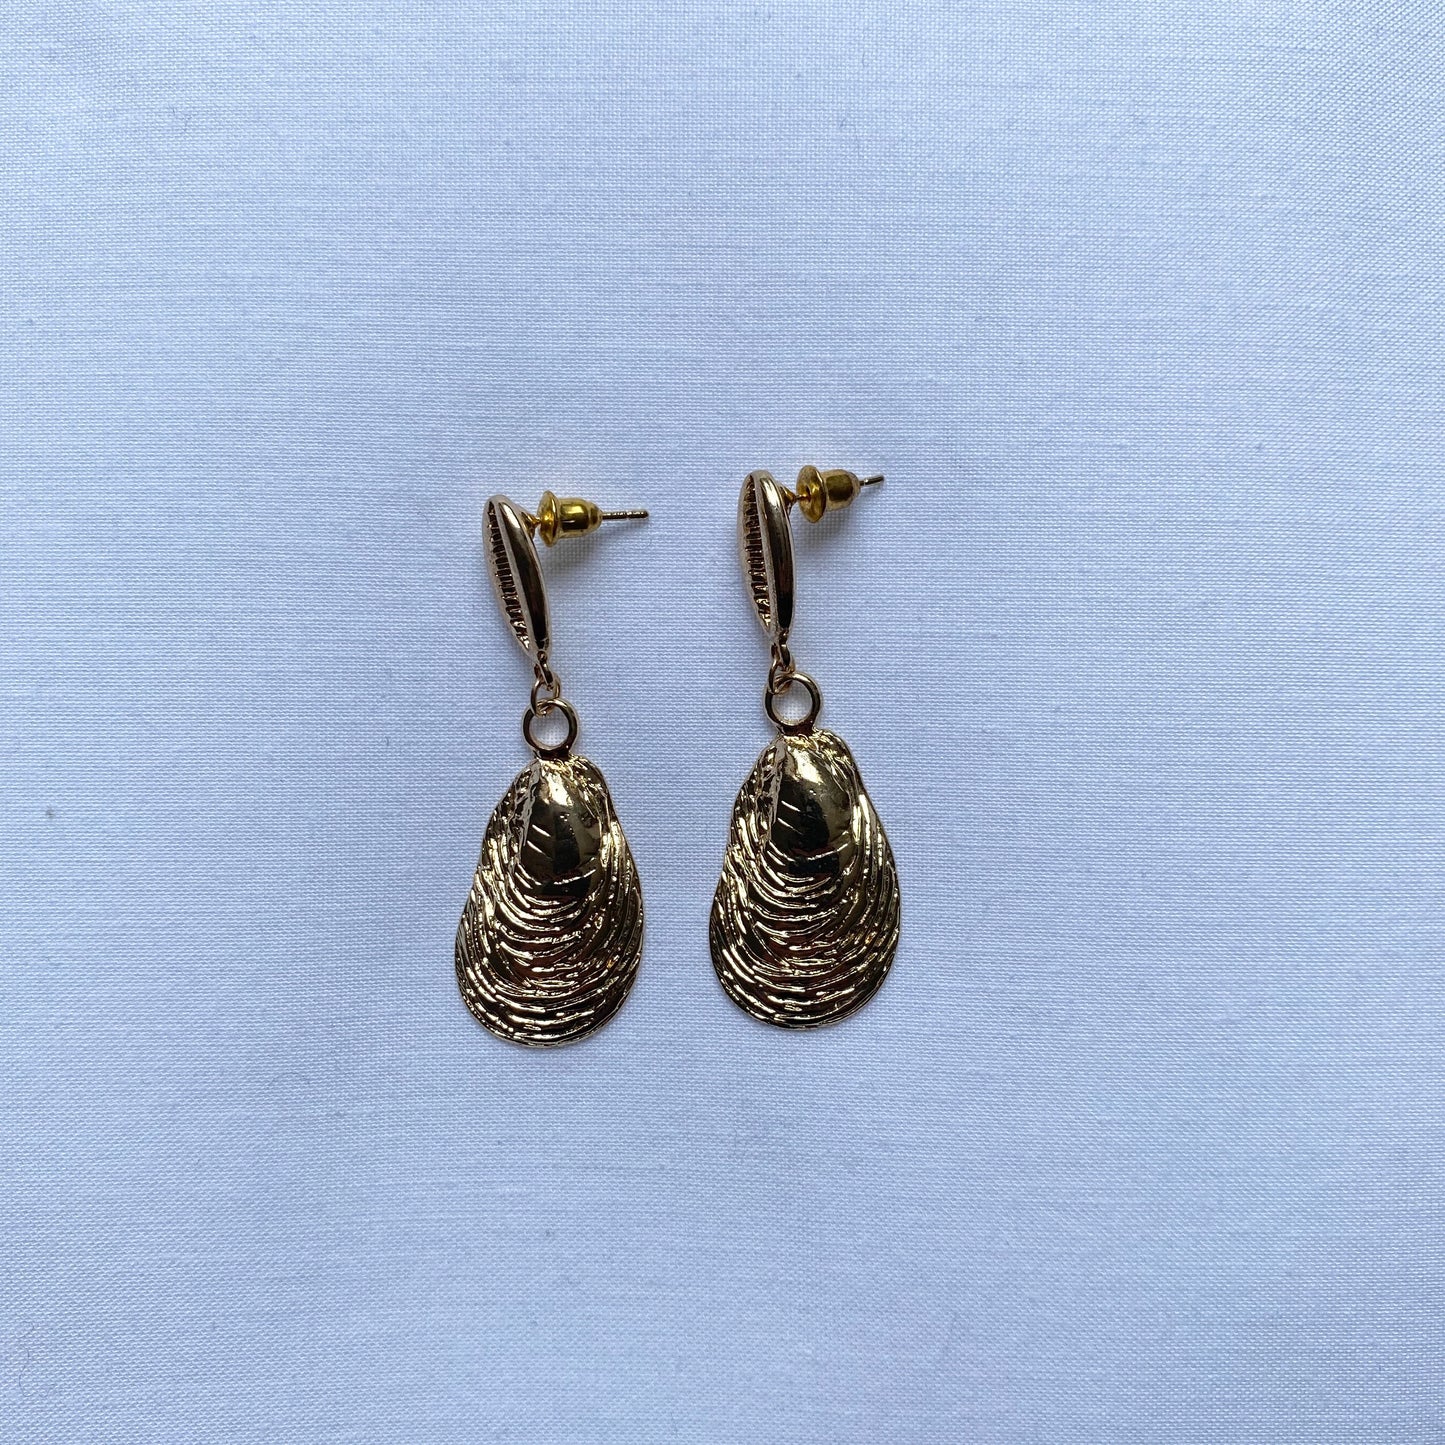 Pair of Peaches - Gold plated shell earrings